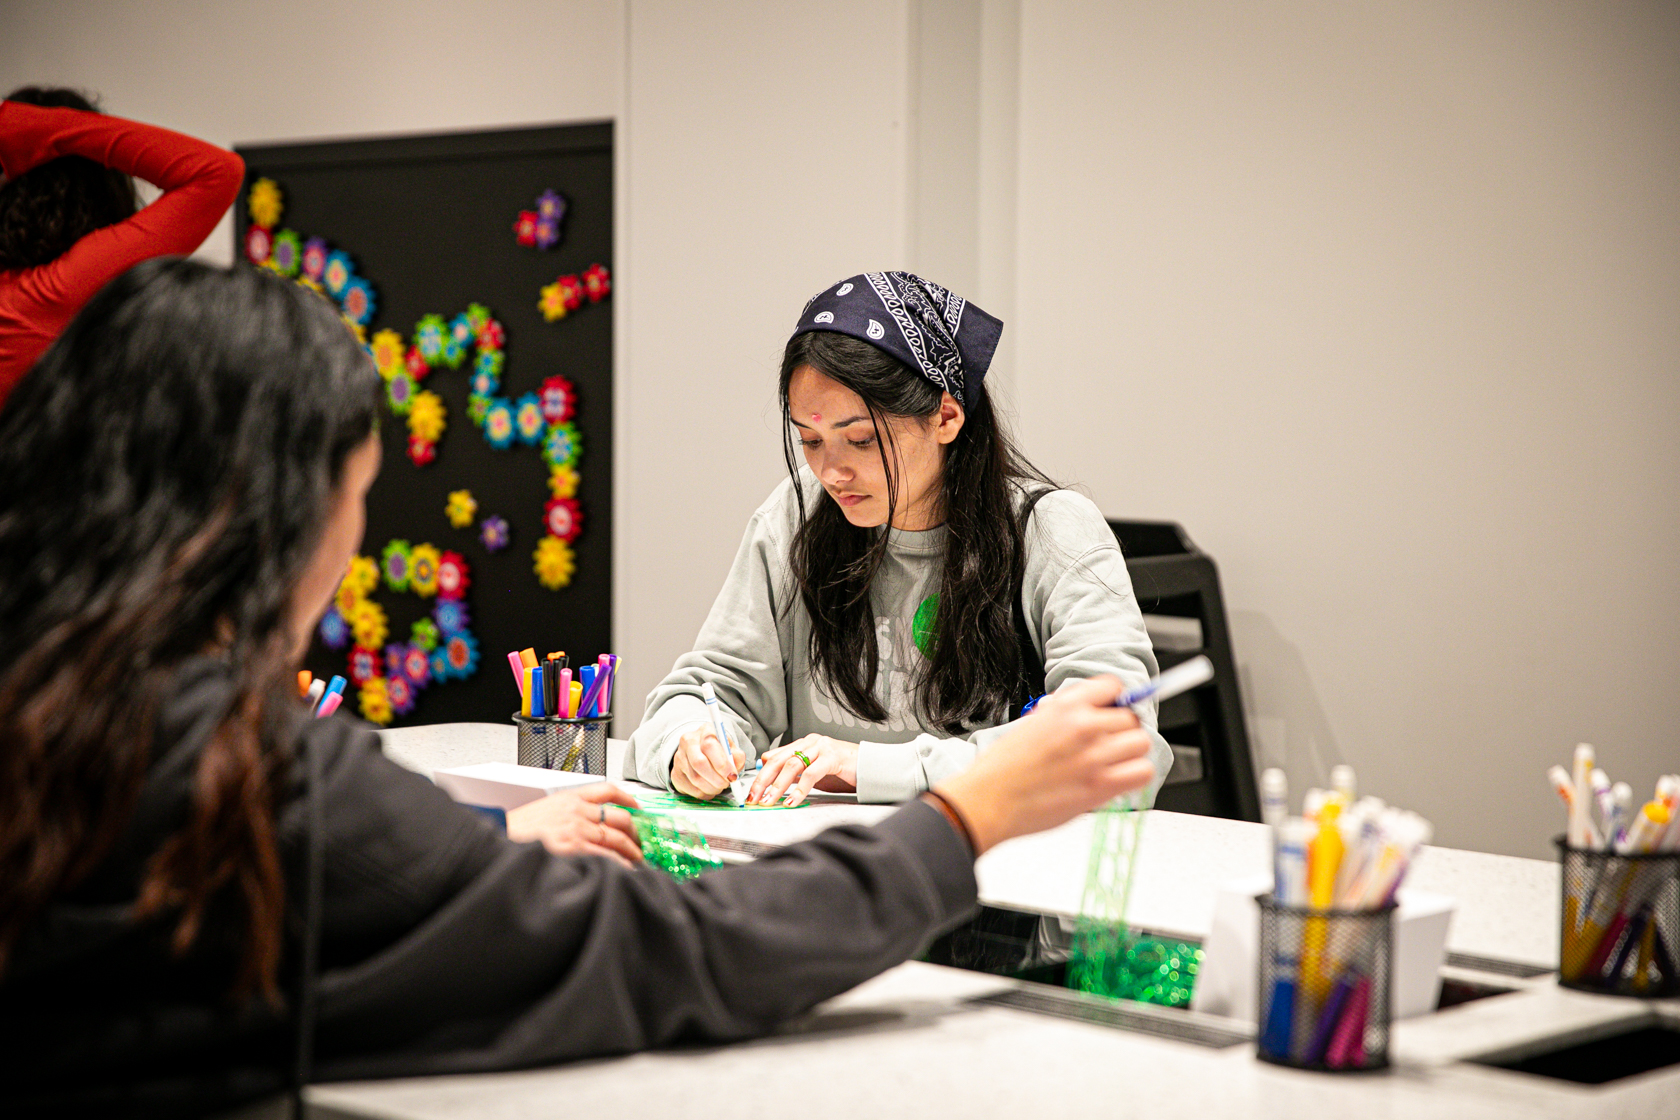 Young girl with bandana on her head working at an art station.